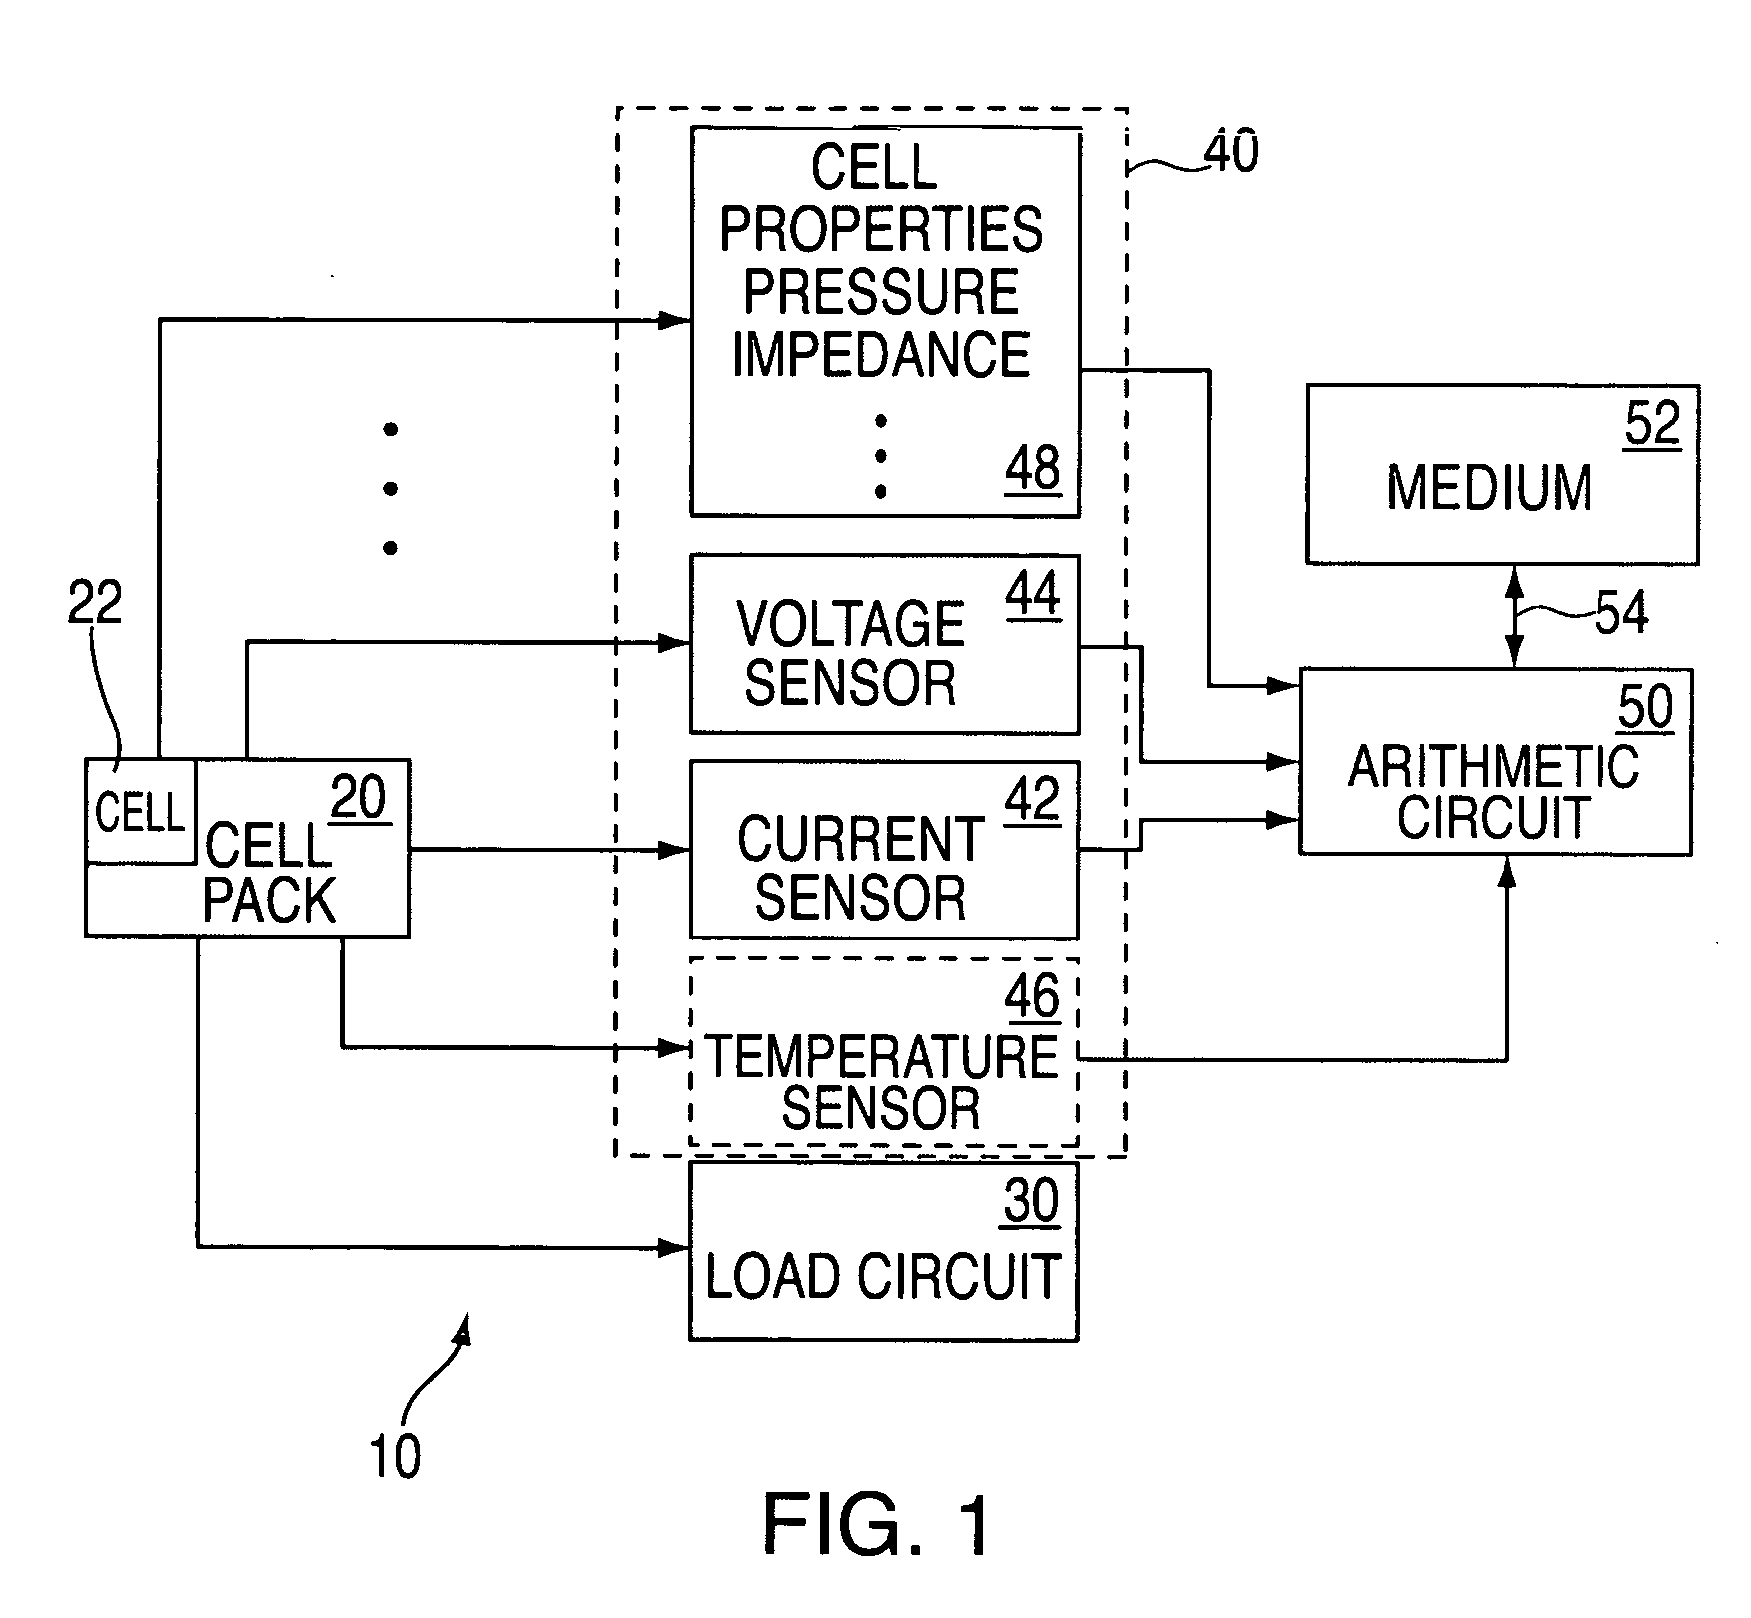 State and parameter estimation for an electrochemical cell